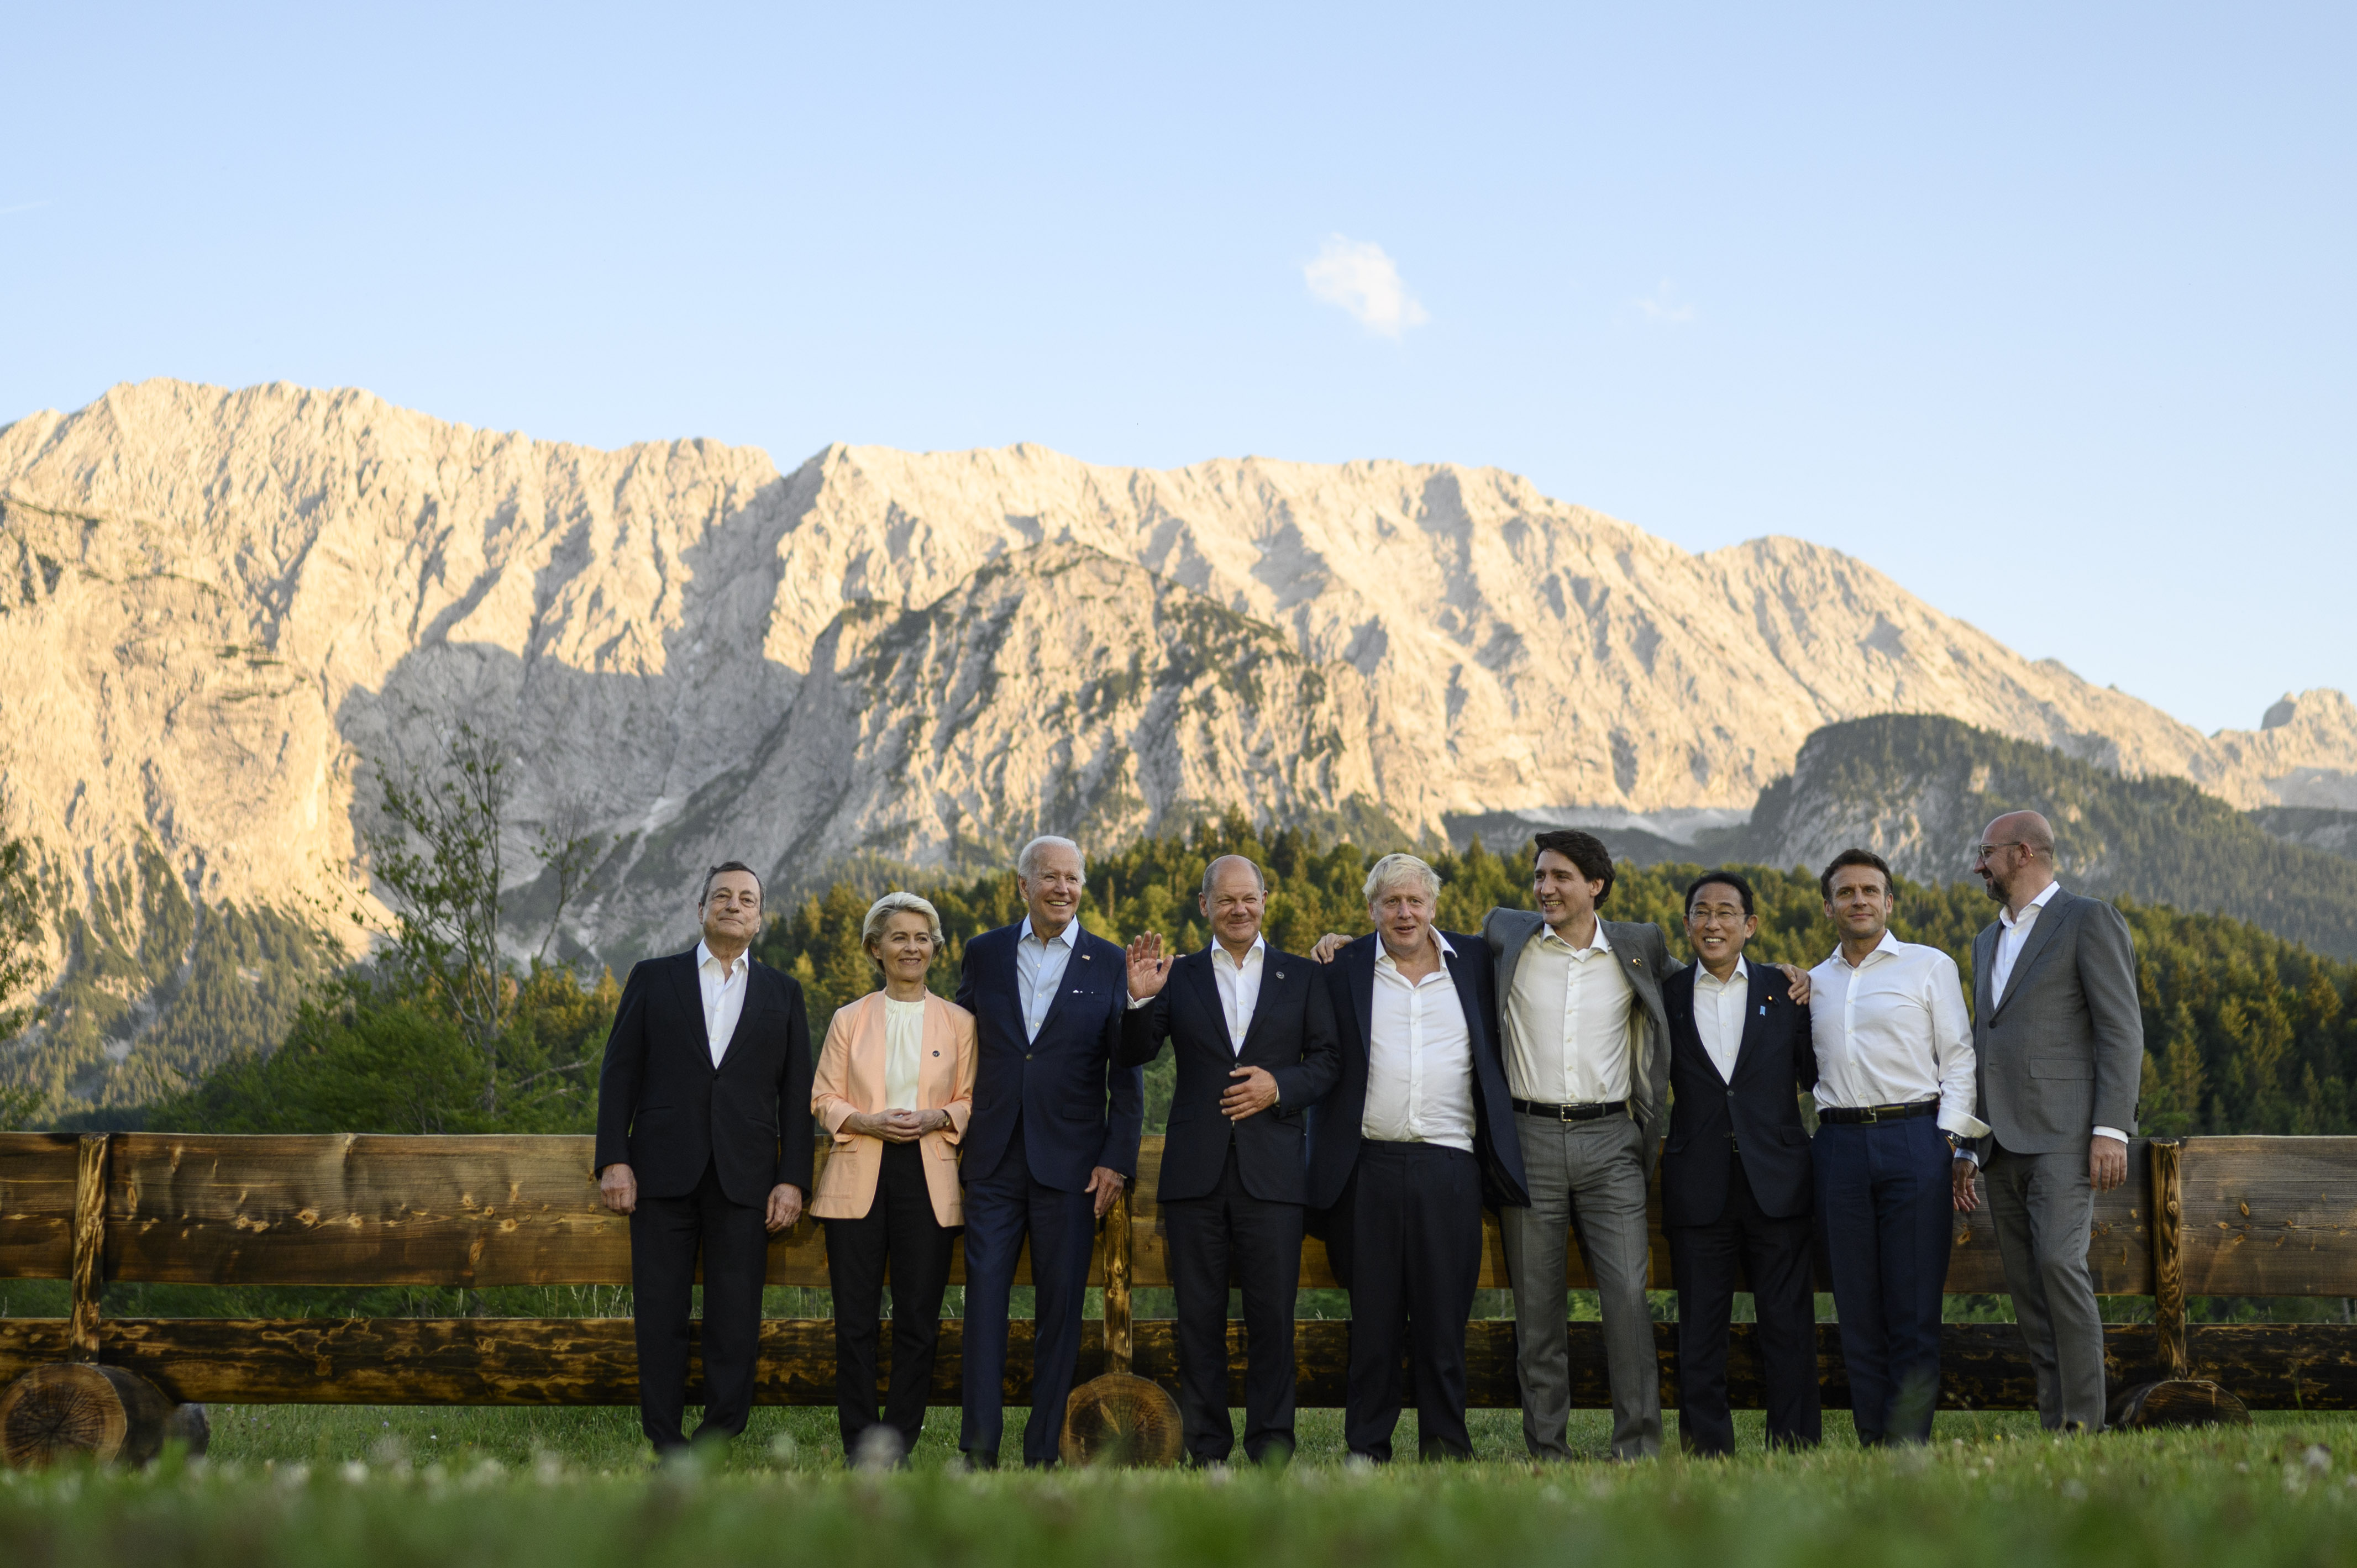 Group photo of G7 participants with the mountains in the background.